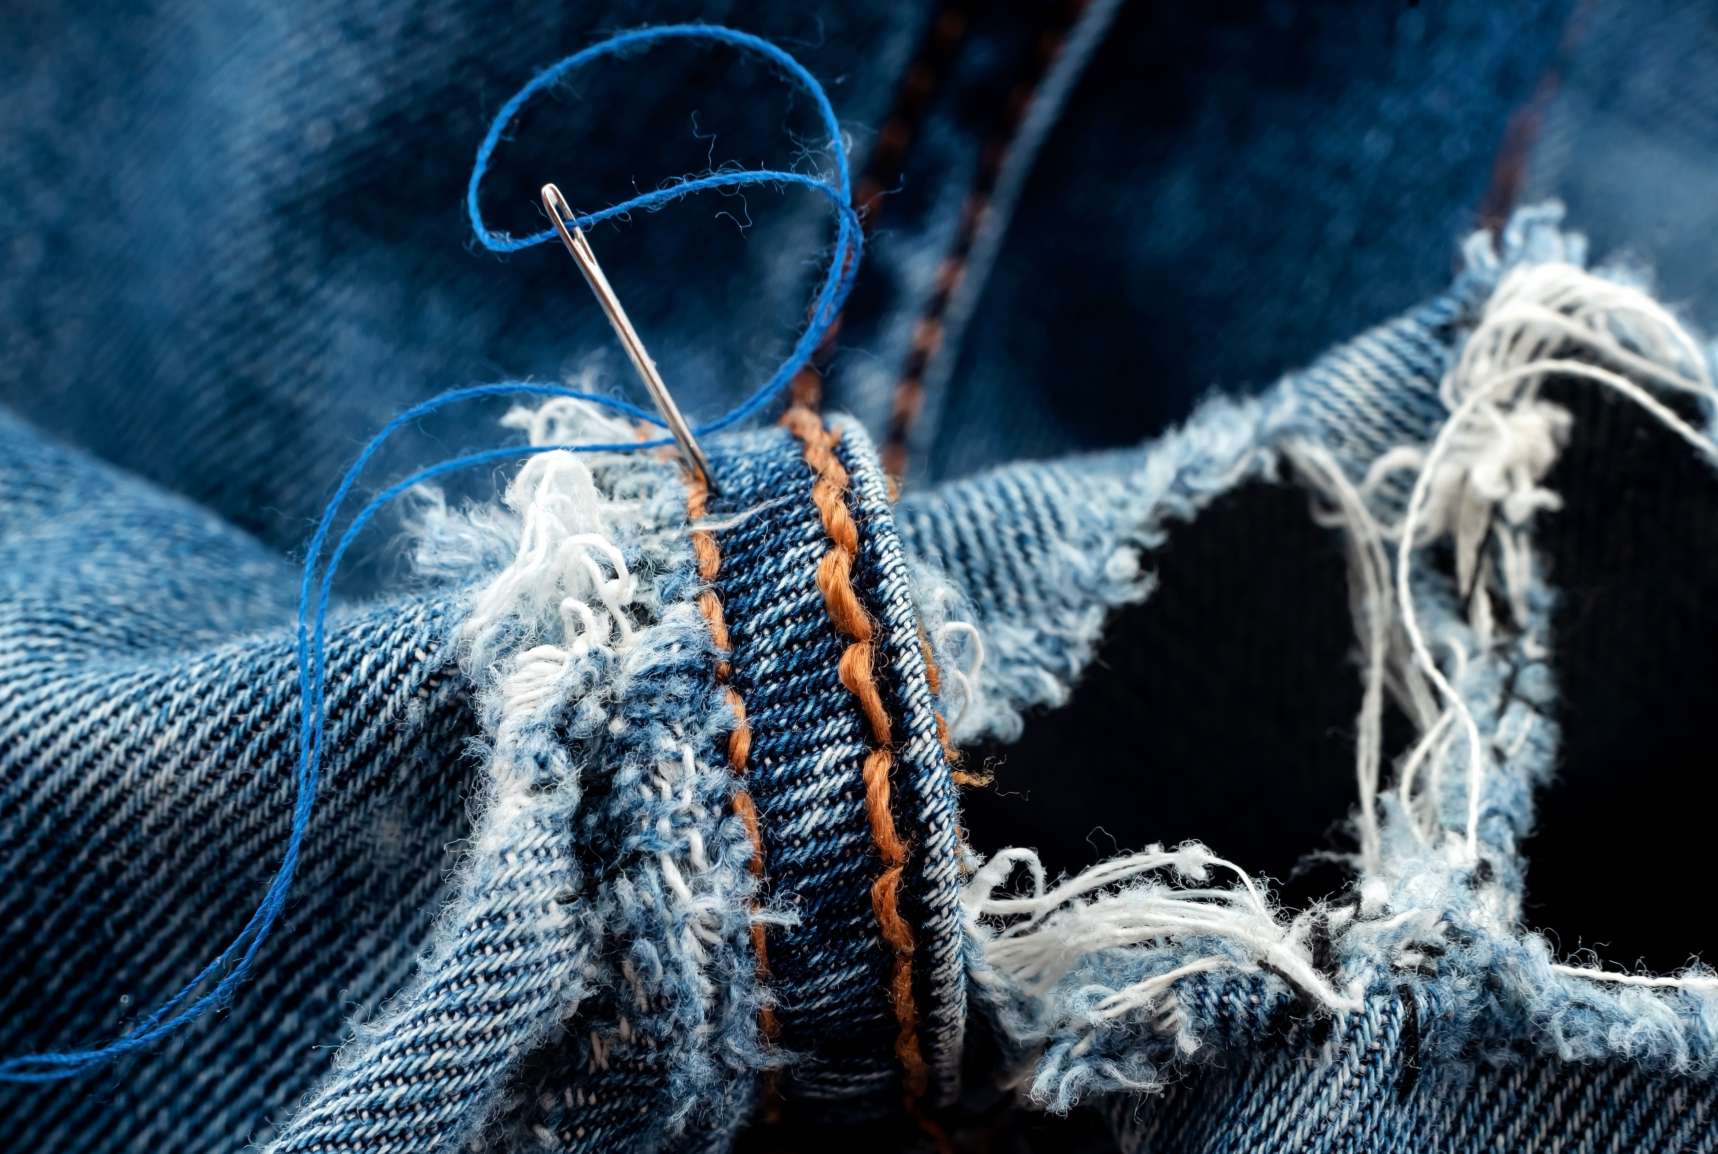 Sewing repair on jeans using natural threads